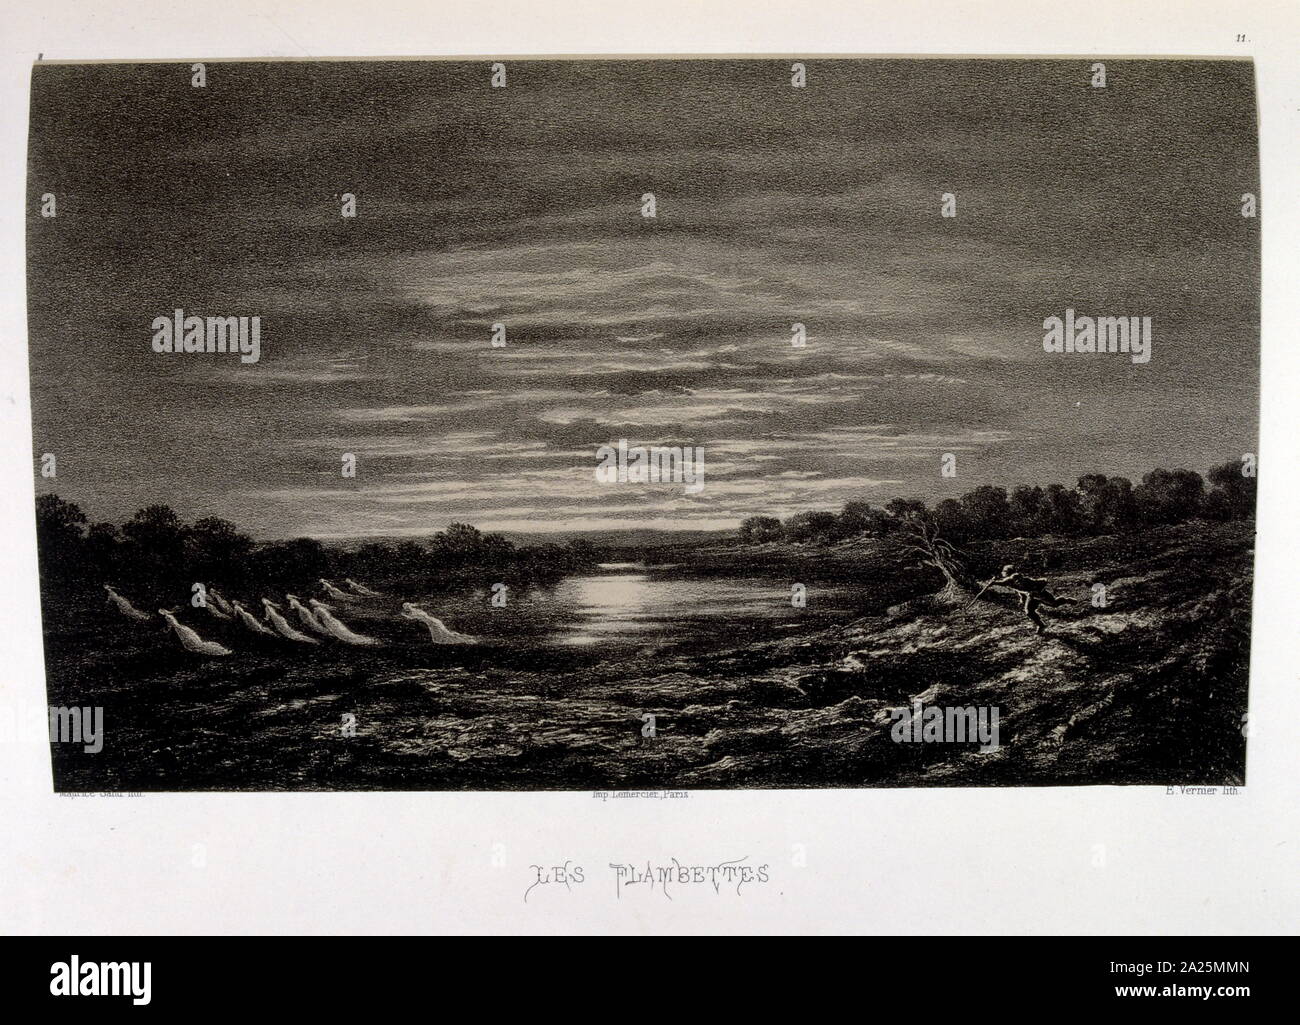 Sunset 1858. Lithograph by Amantine Lucile Dupin (1804 – 1876), known by her nom de plume George Sand. A French novelist and memoirist. She is equally well known for her much publicized romantic affairs with a number of artists, including the composer and pianist Frédéric Chopin and the writer Alfred de Musset. Stock Photo